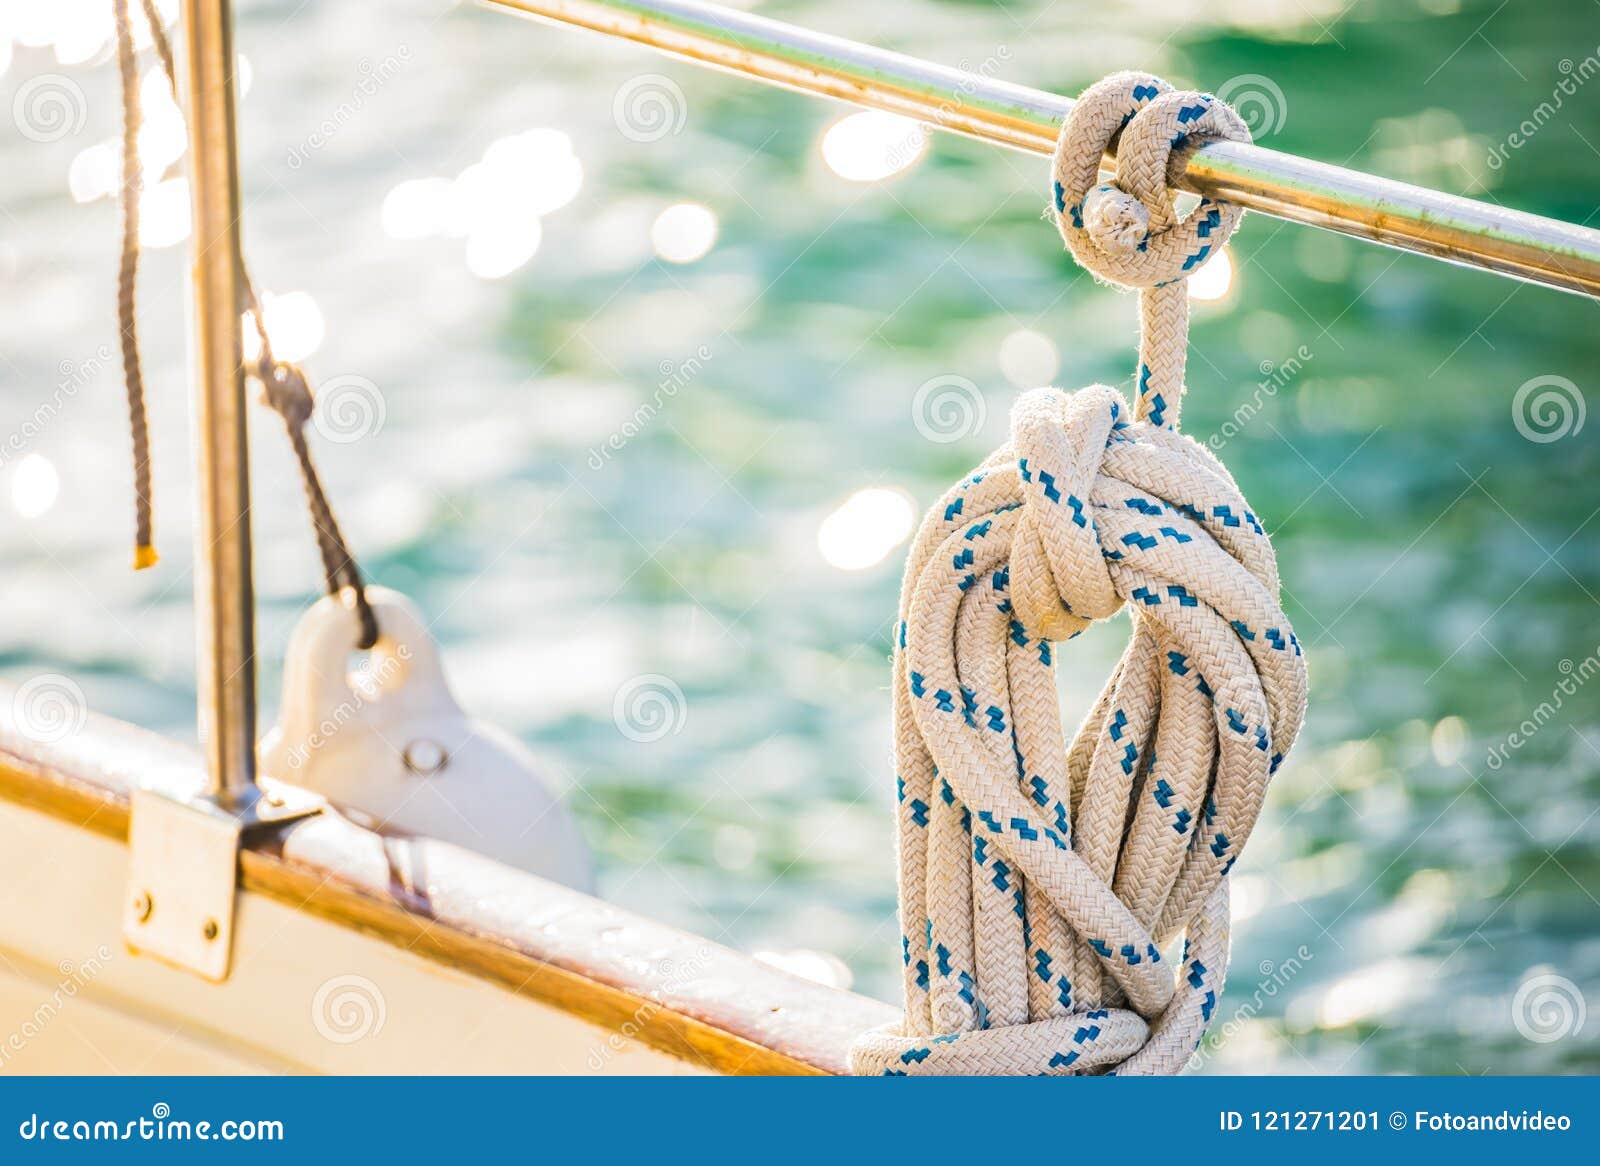 Nautical Rope Tied on Railing of Boat Deck, Yachting Stock Image